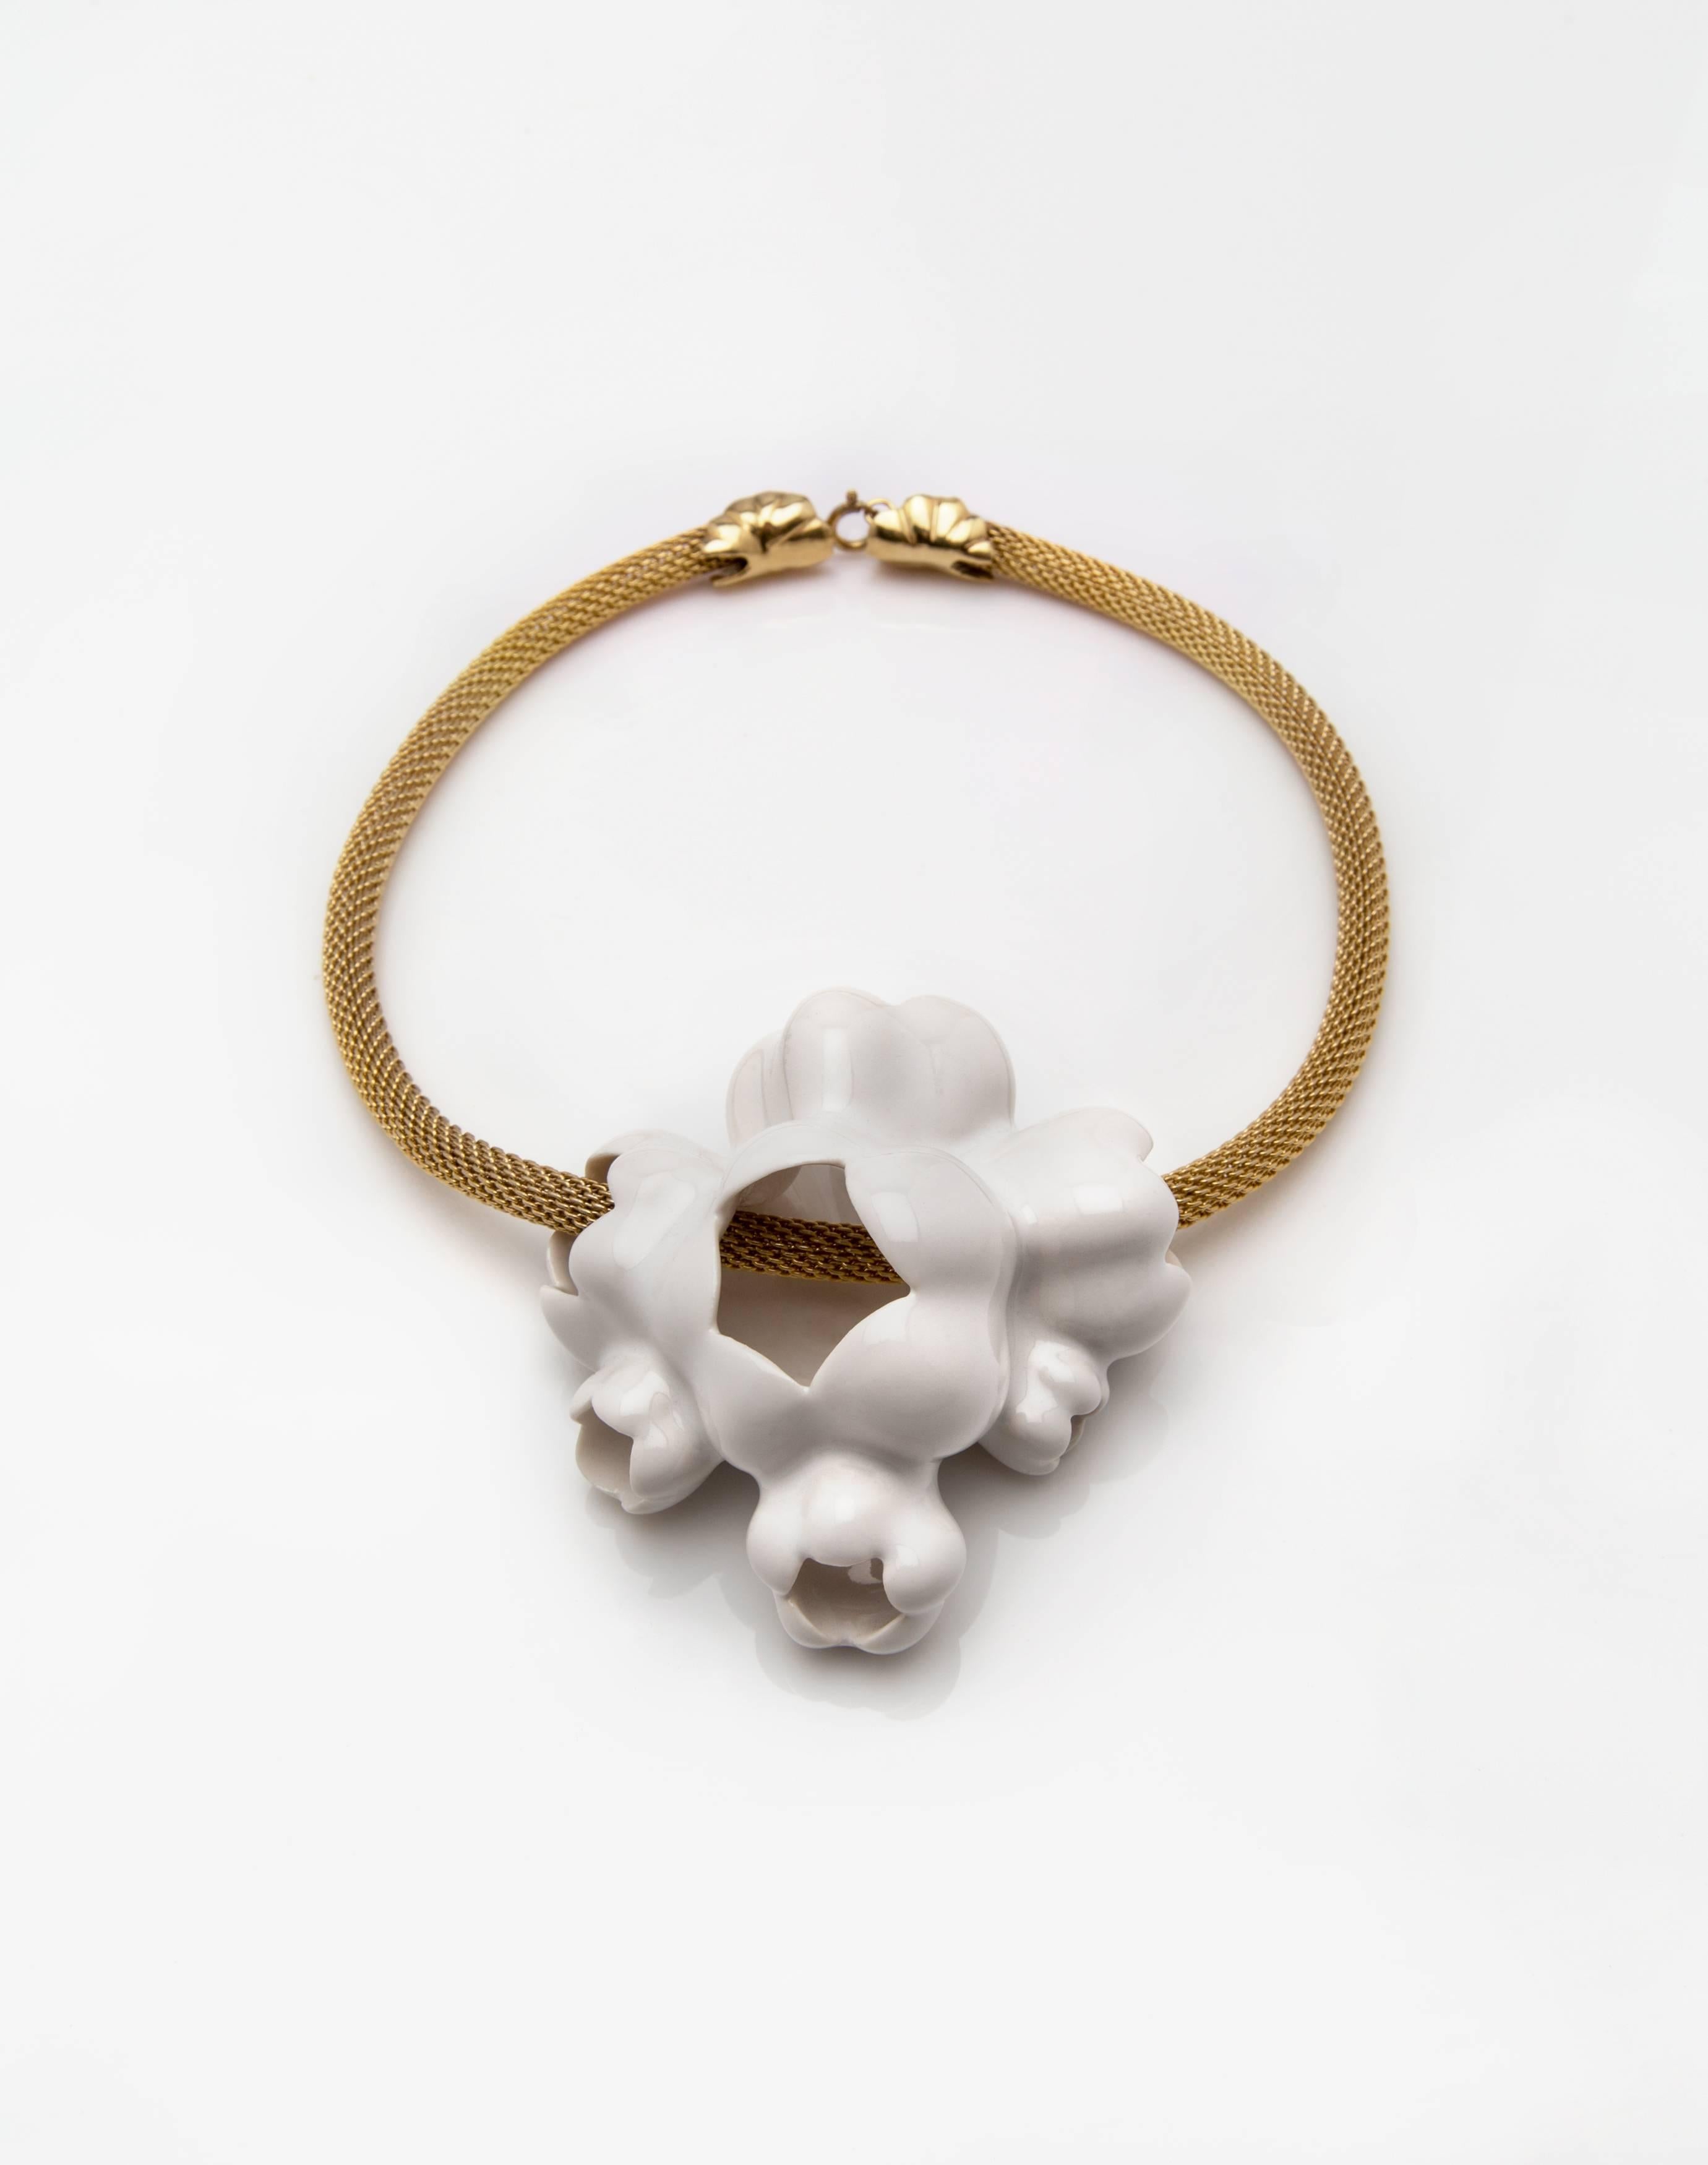 Porcelain and Gold Delicate Cloud Fruit necklace - Mixed Media Art by David Wiseman